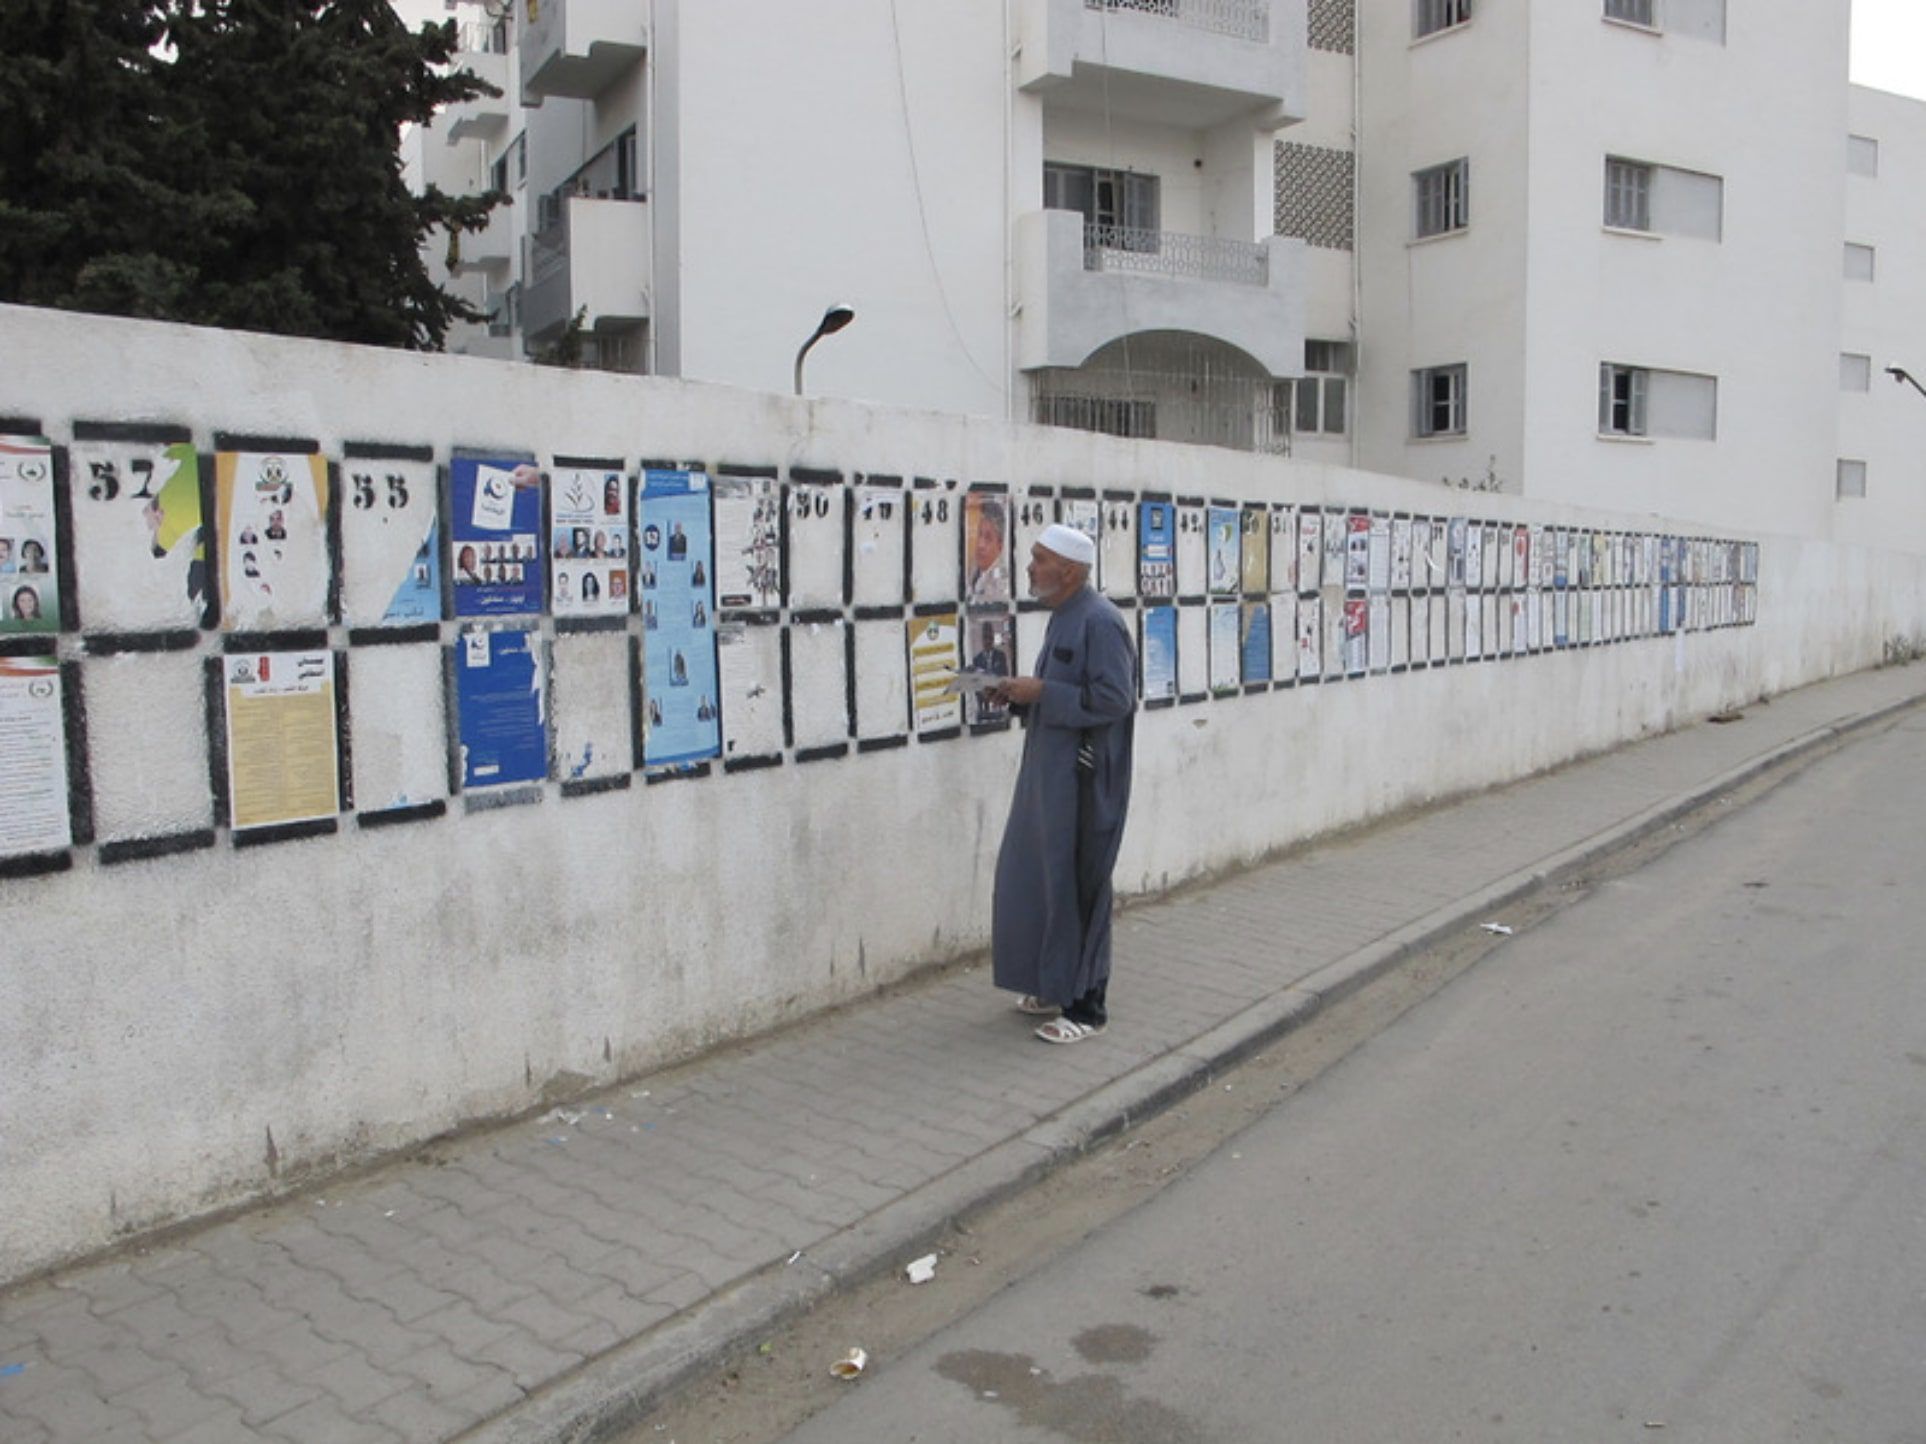 Middle Eastern man reads posters on a wall